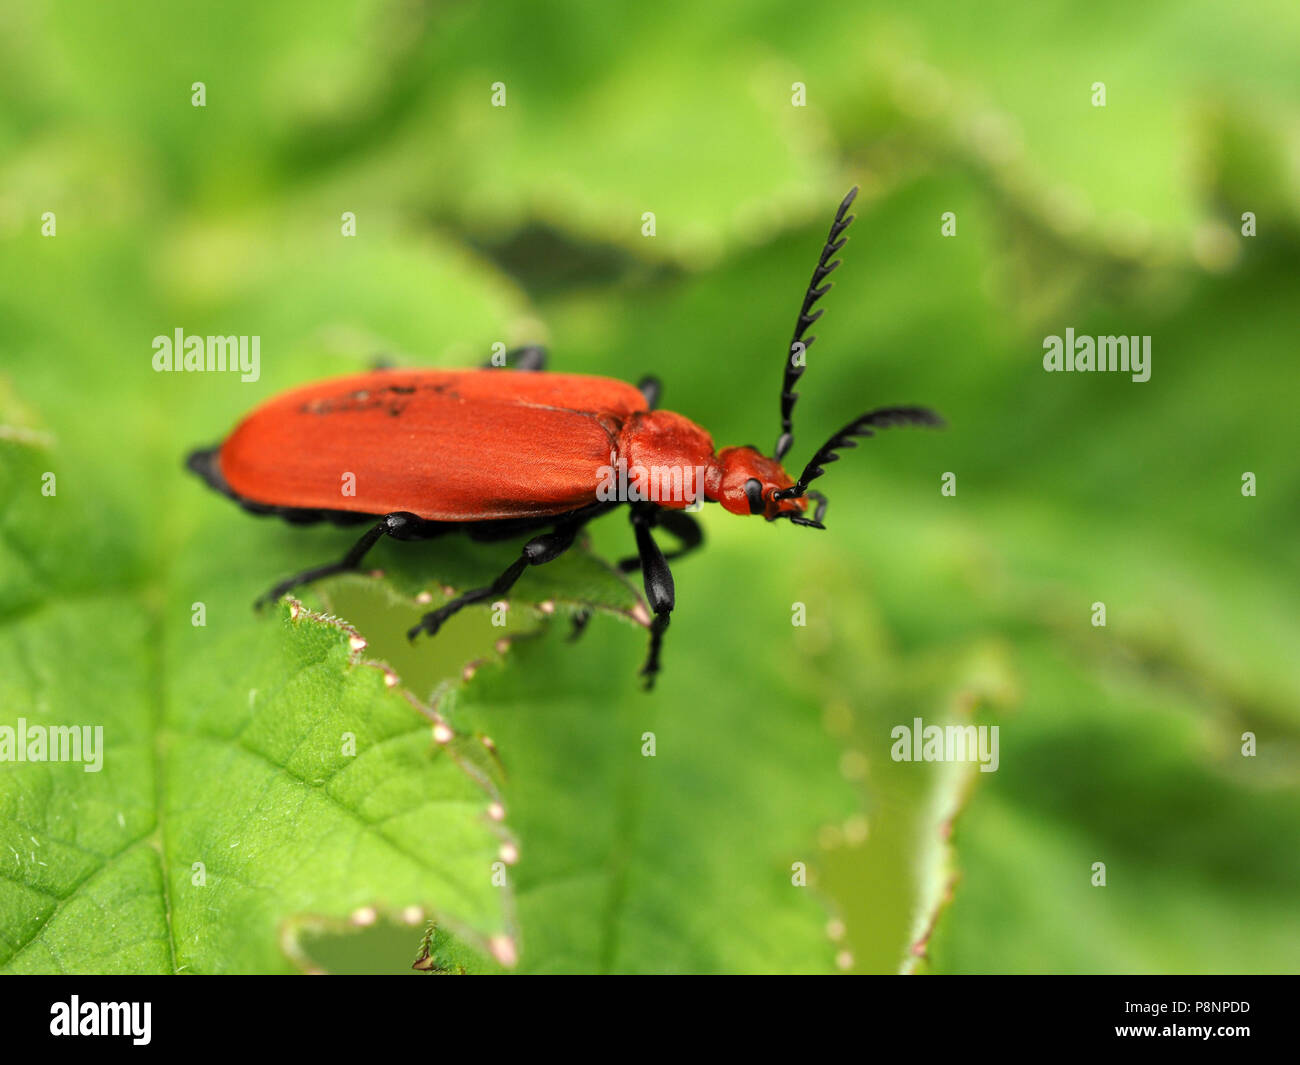 contrasting bright red Cardinal Beetle (Pyrochroa serraticornis) with ...